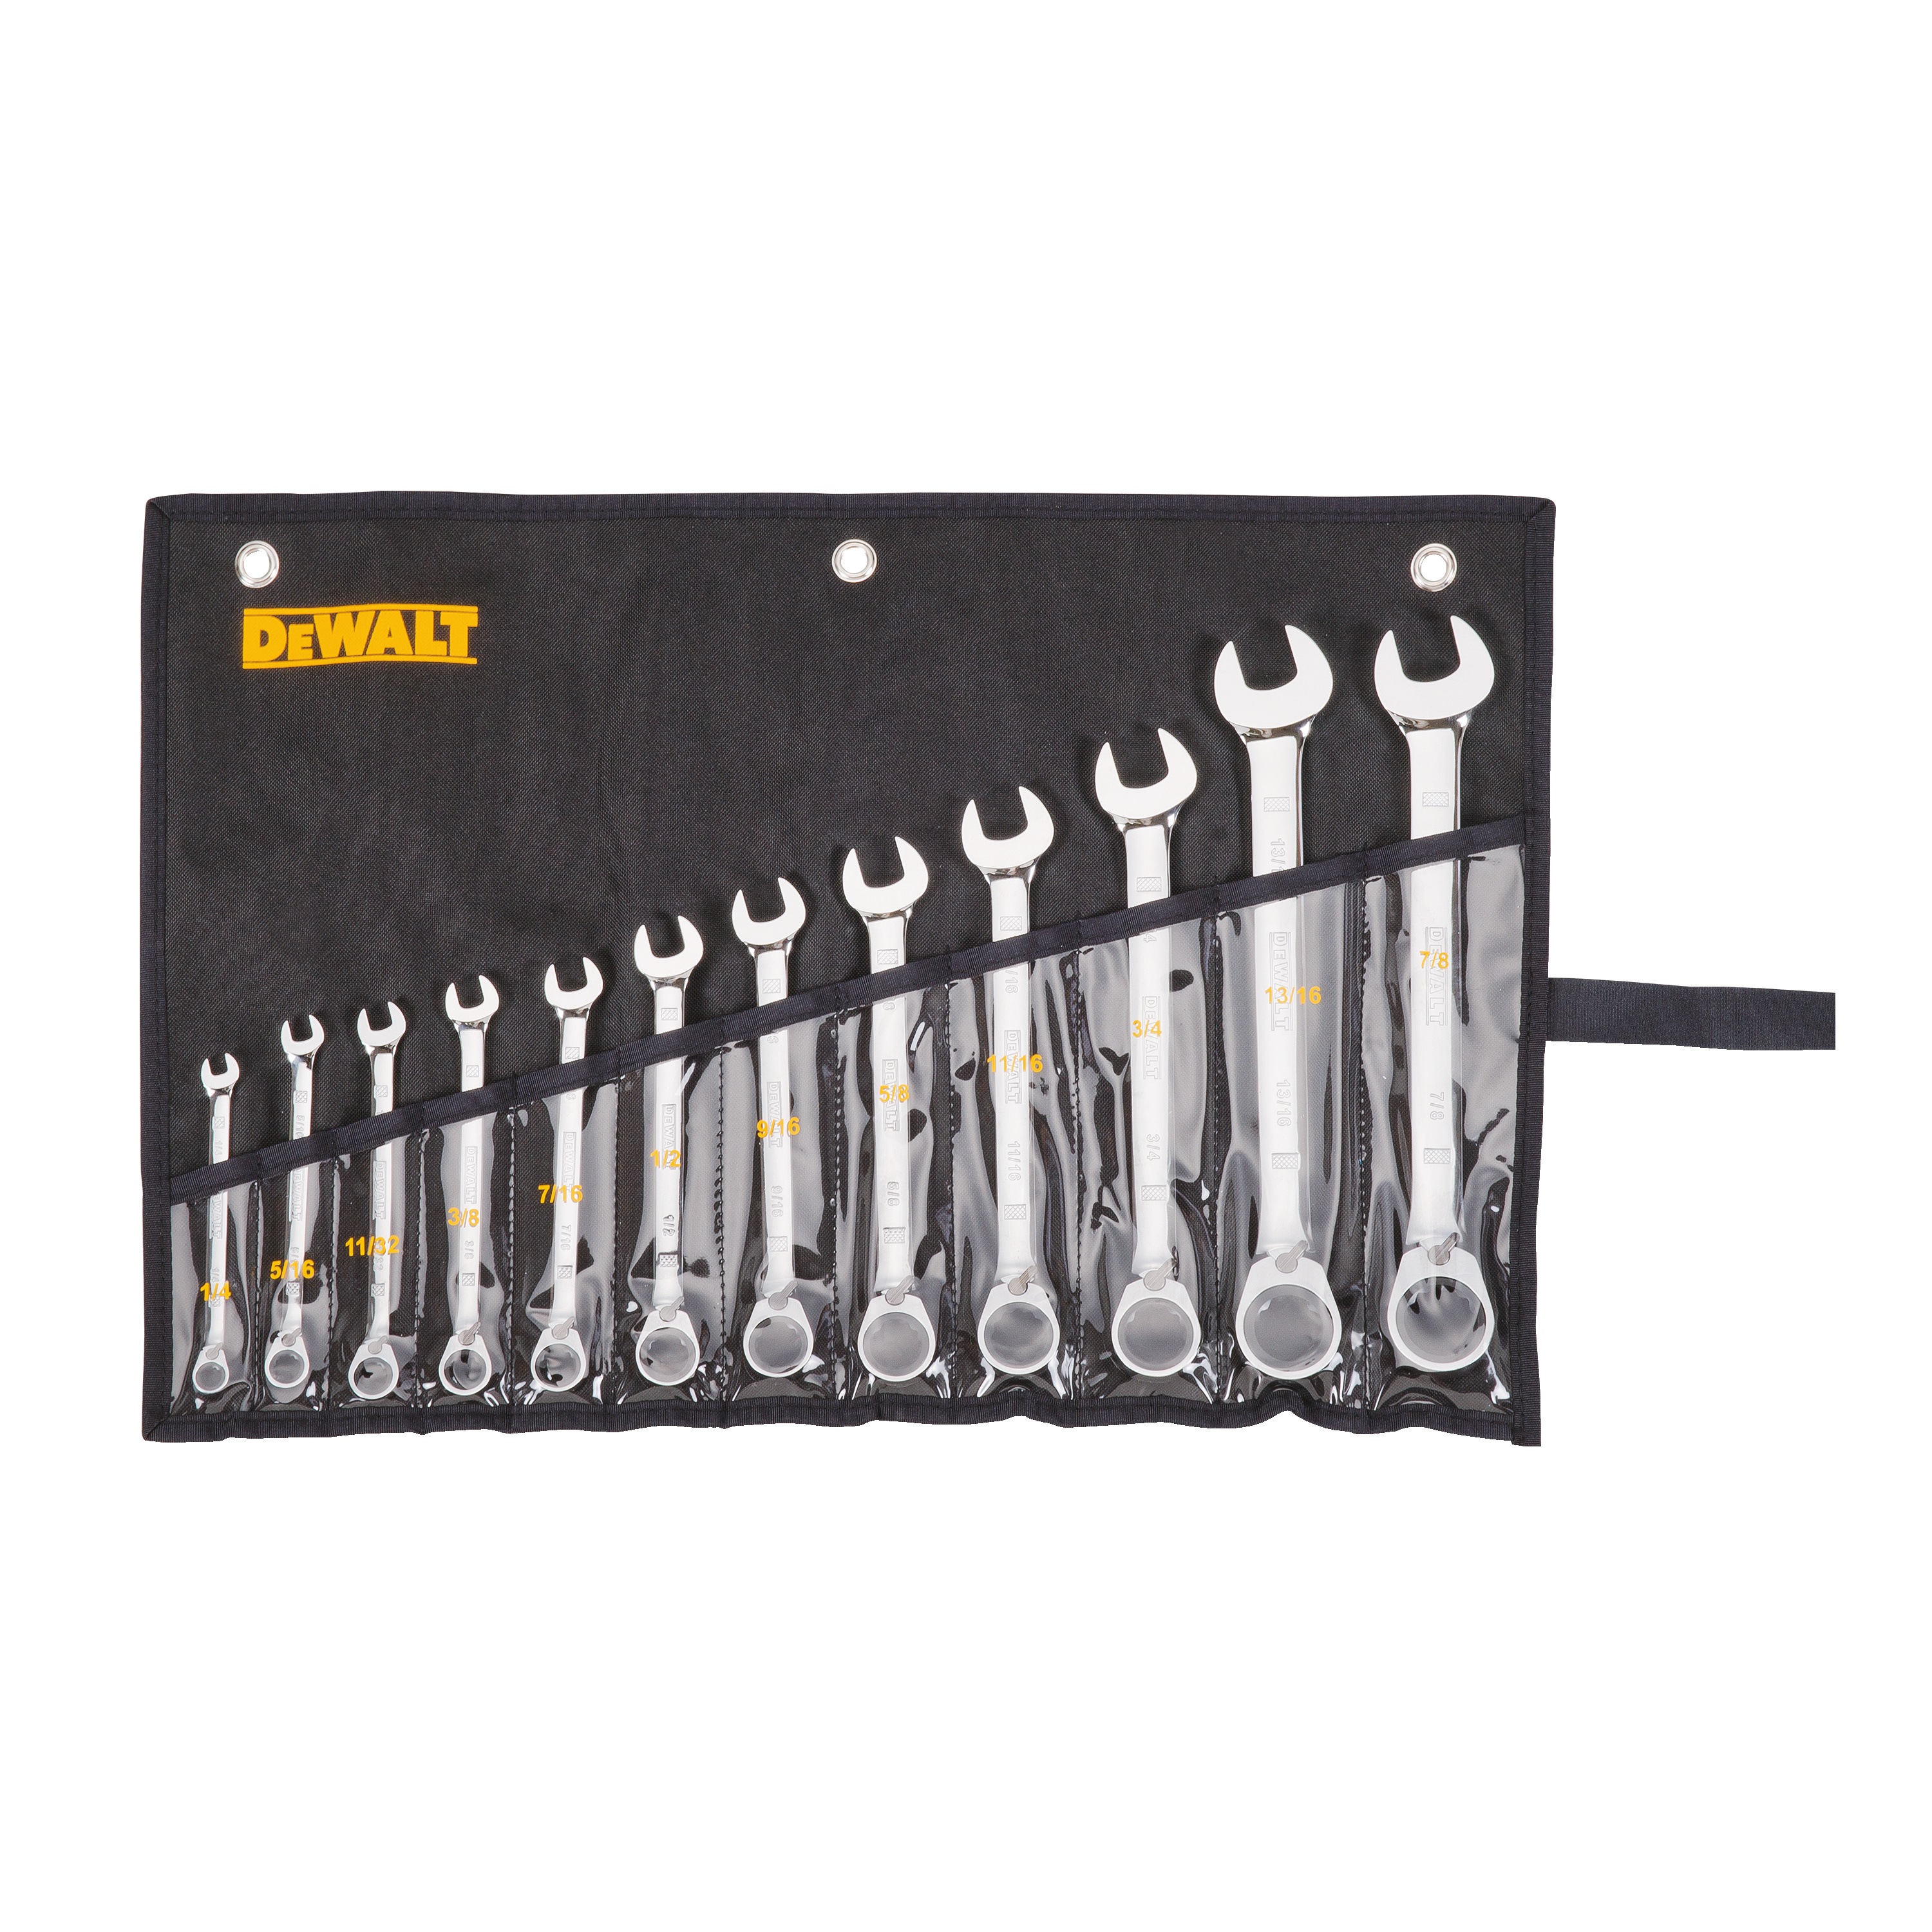 DEWALT 12 piece reversible ratcheting wrench set assembled in its kit.